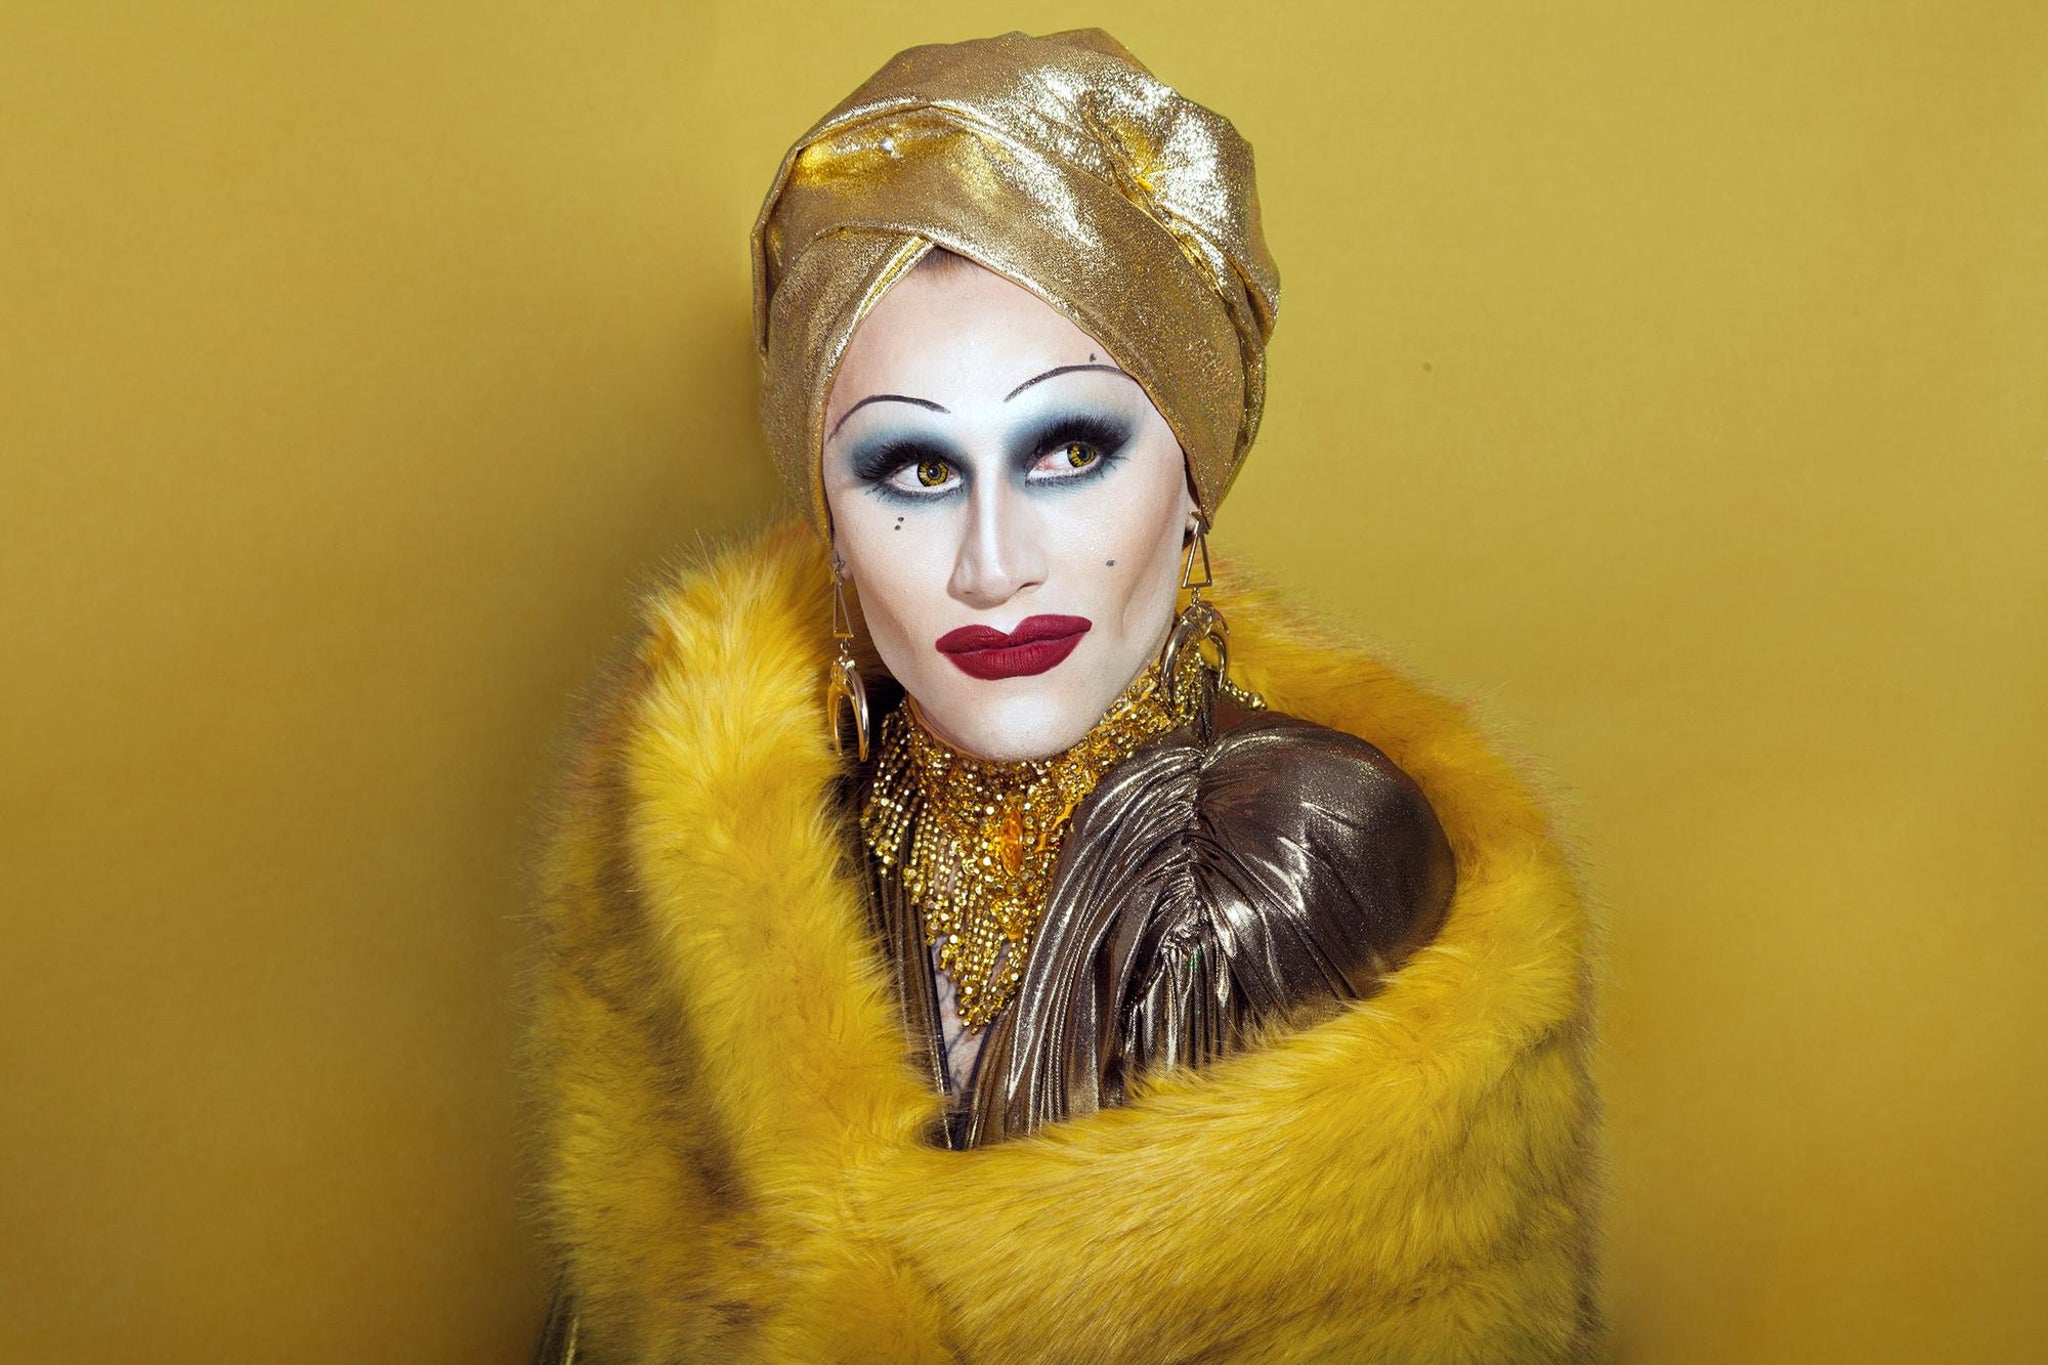 'Drag Race UK' season 2 is in full swing, and the tea is already scalding. Fans are upset this queen was sent home so early, so hear from her personally.